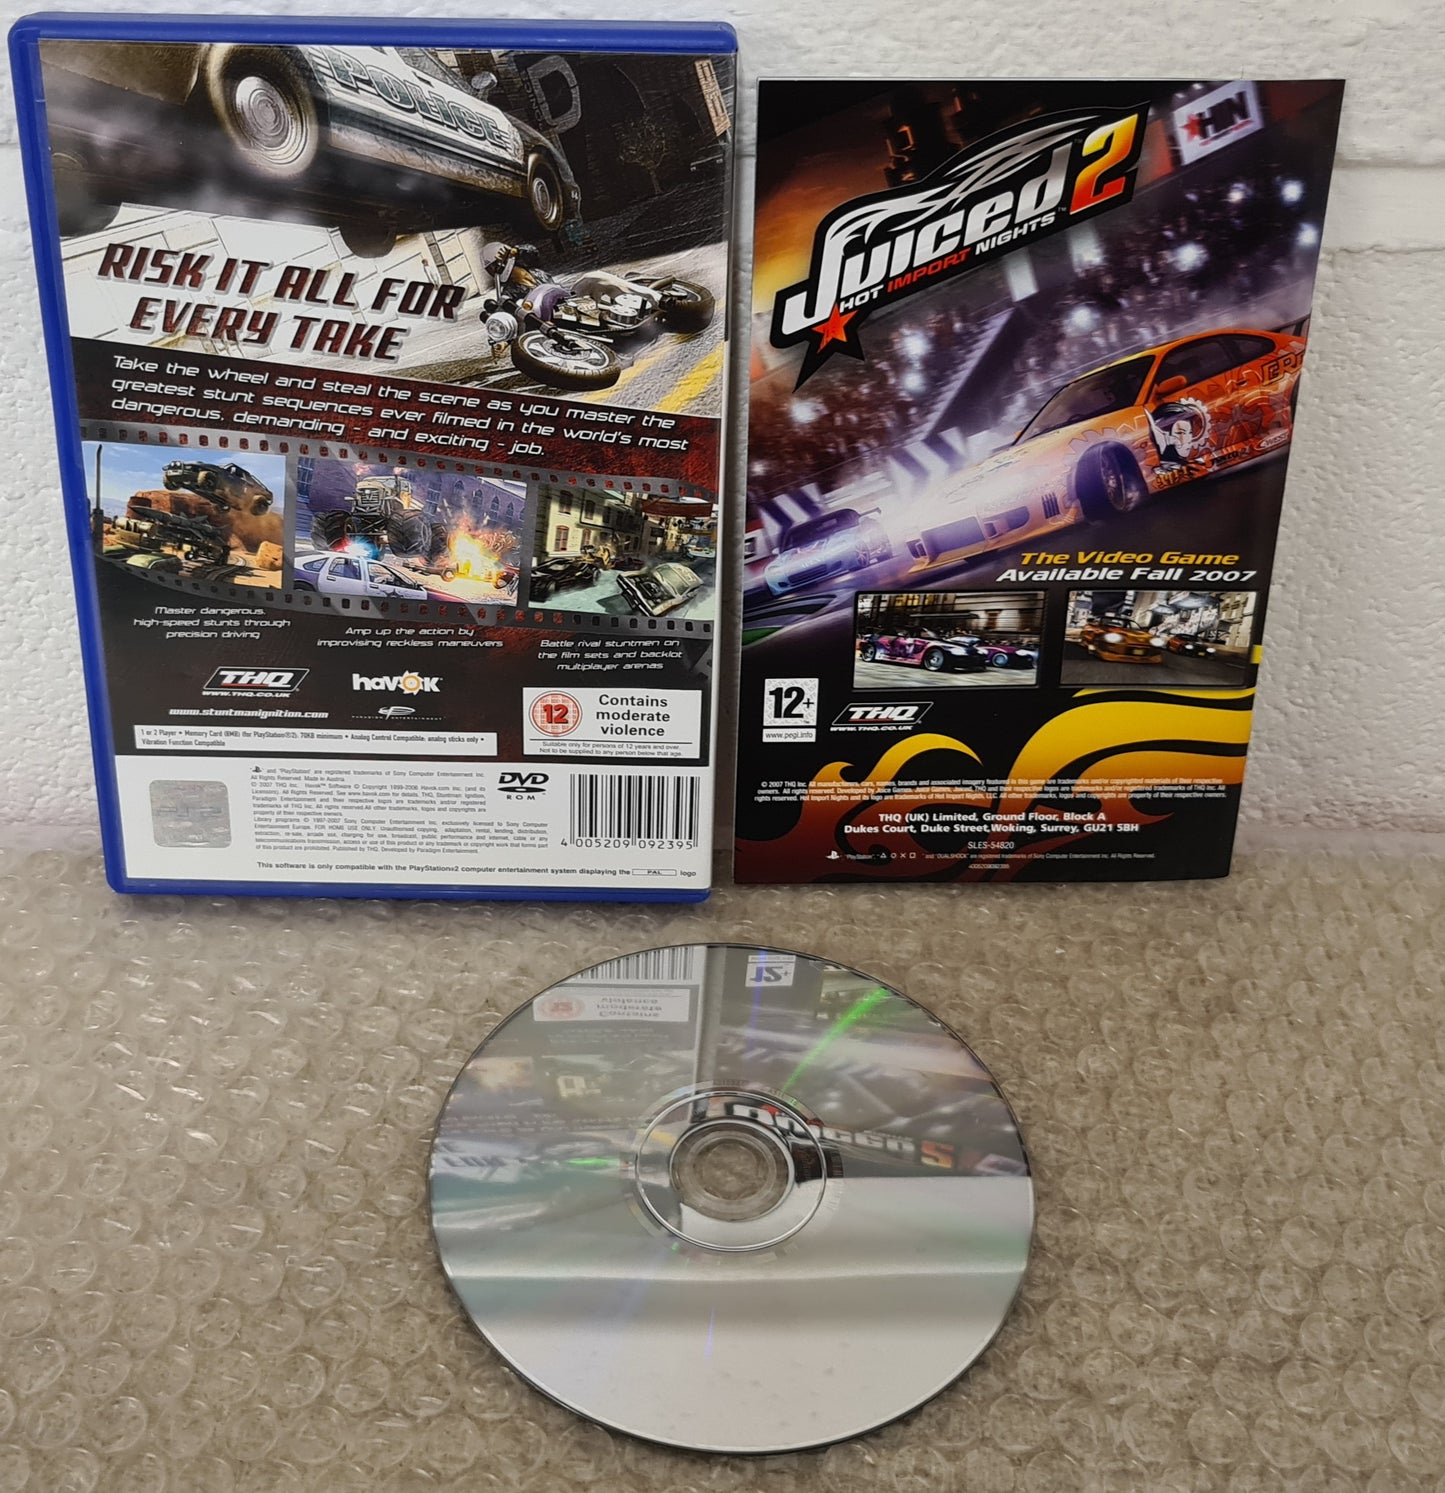 Stuntman Ignition Sony Playstation 2 (PS2) Game